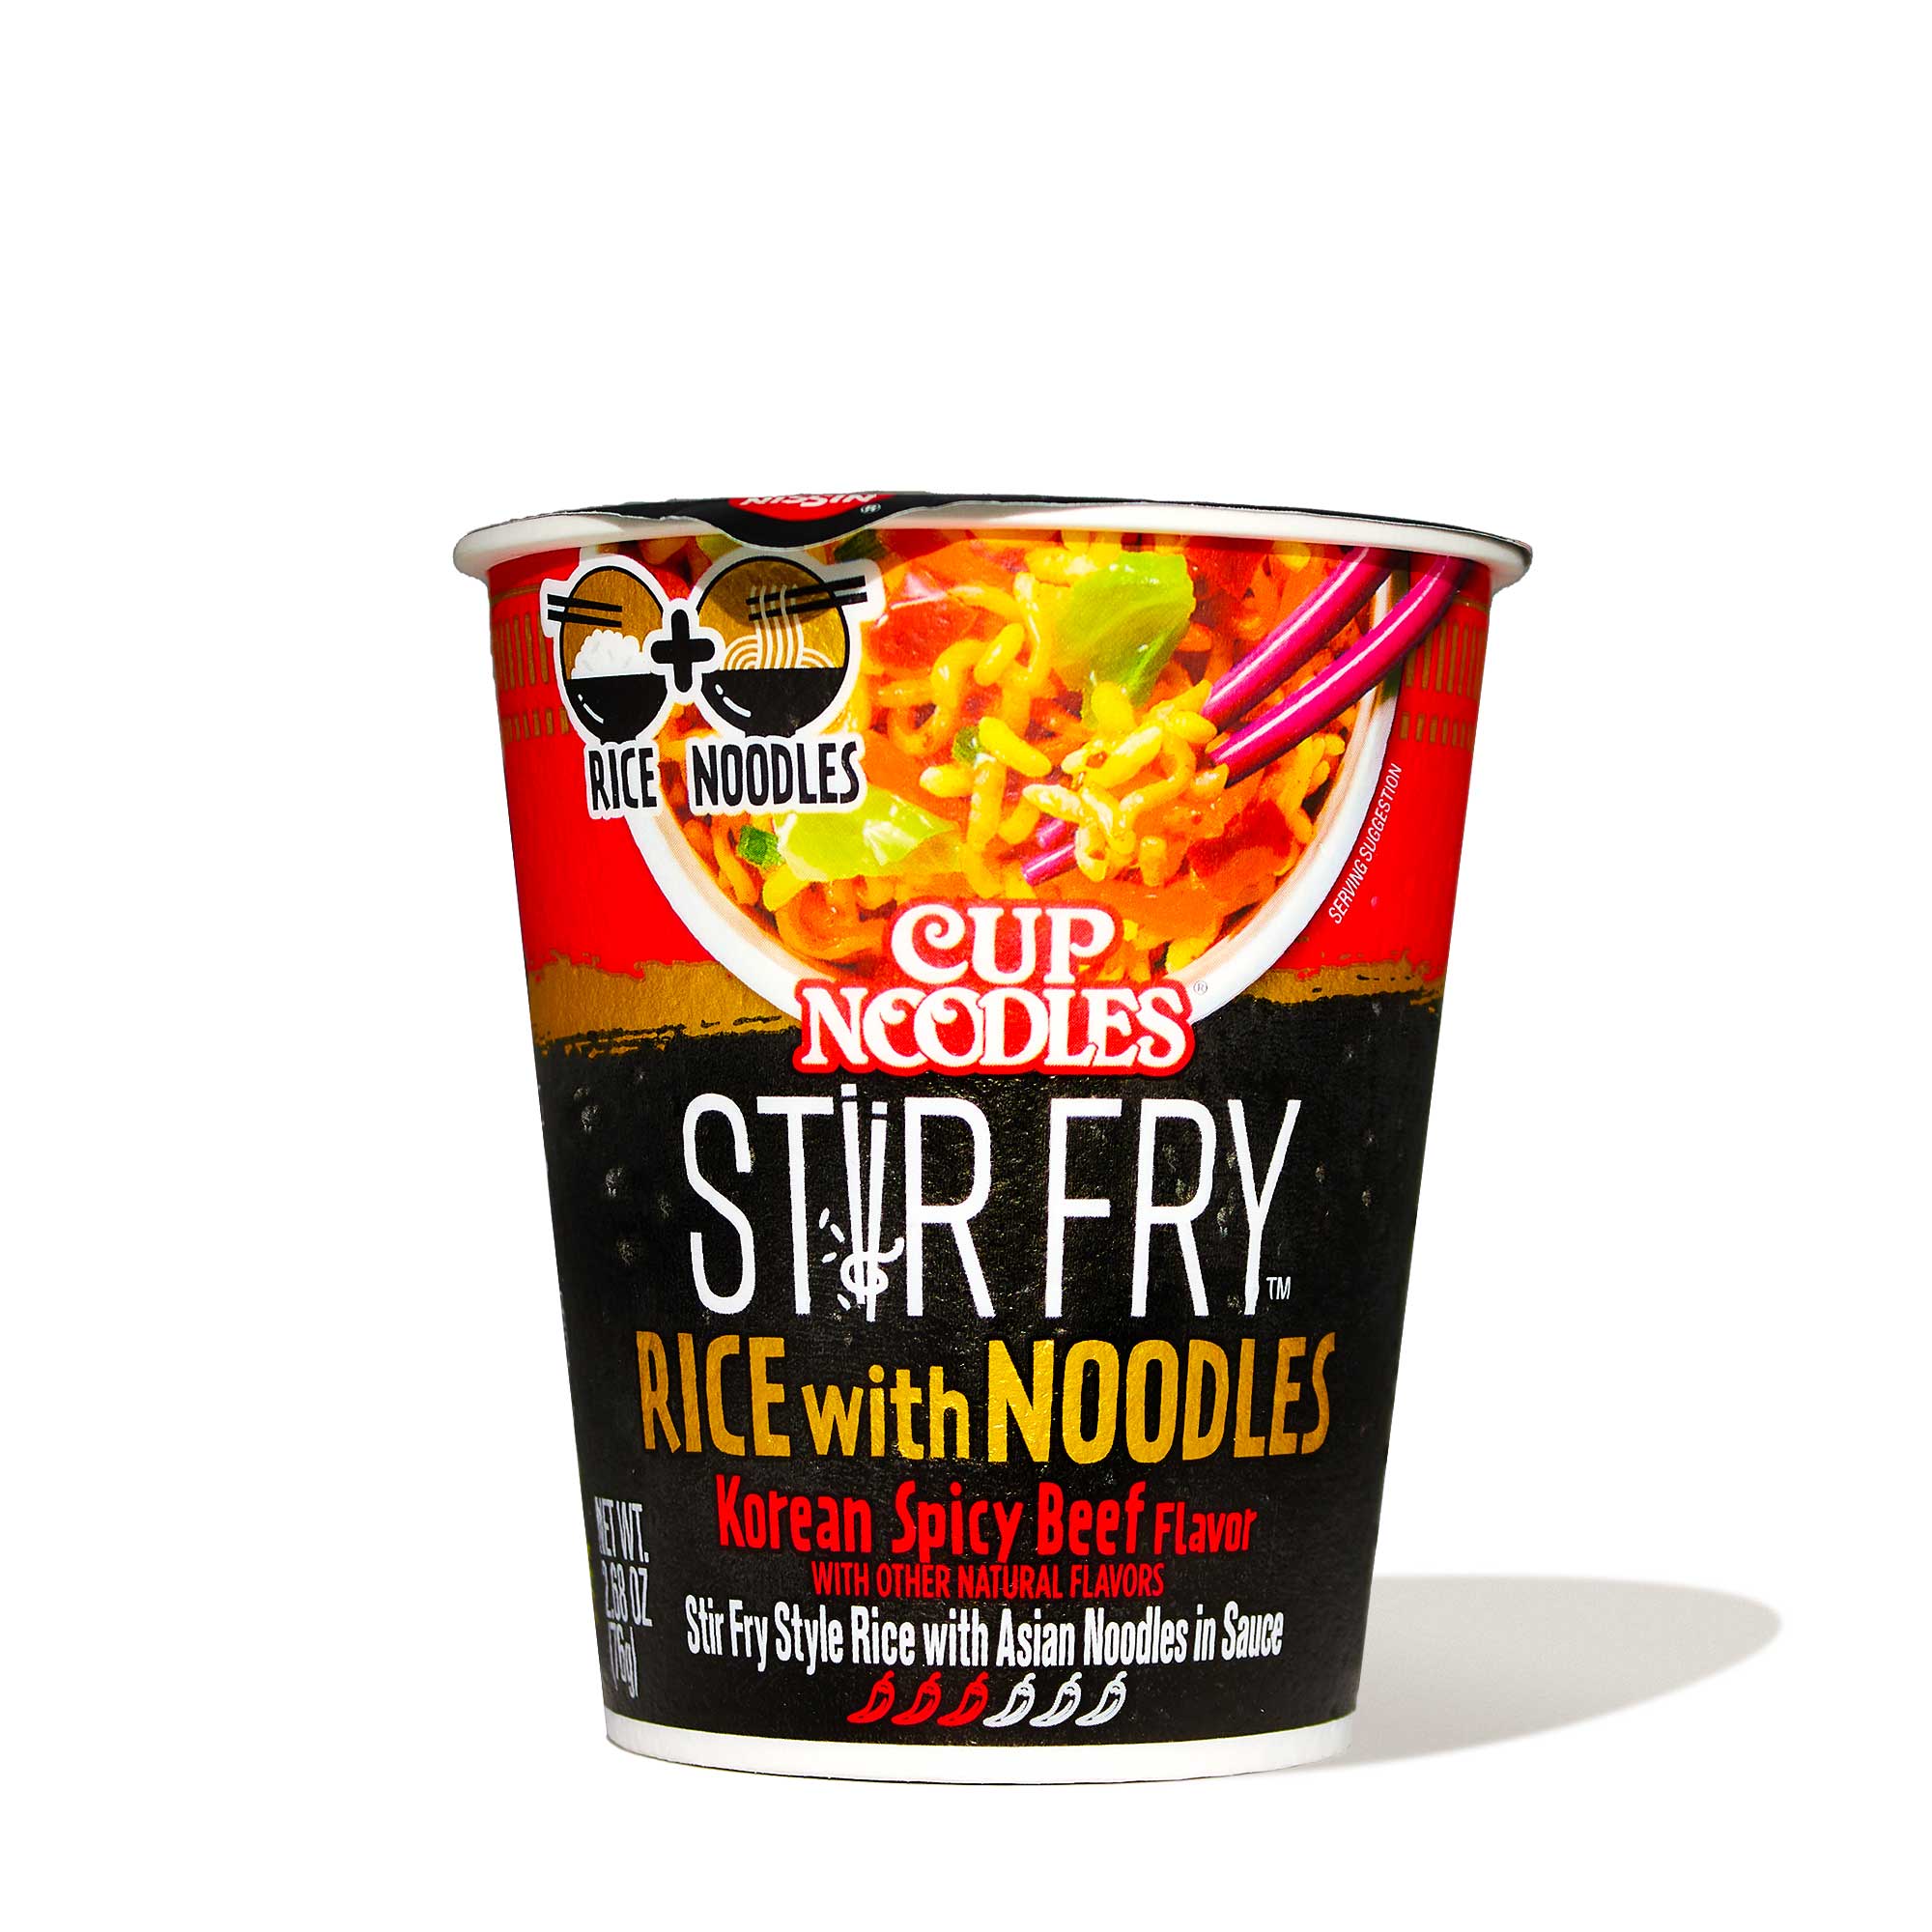 Nissin Cup Noodles 5 Spices Beef, Worldwide delivery